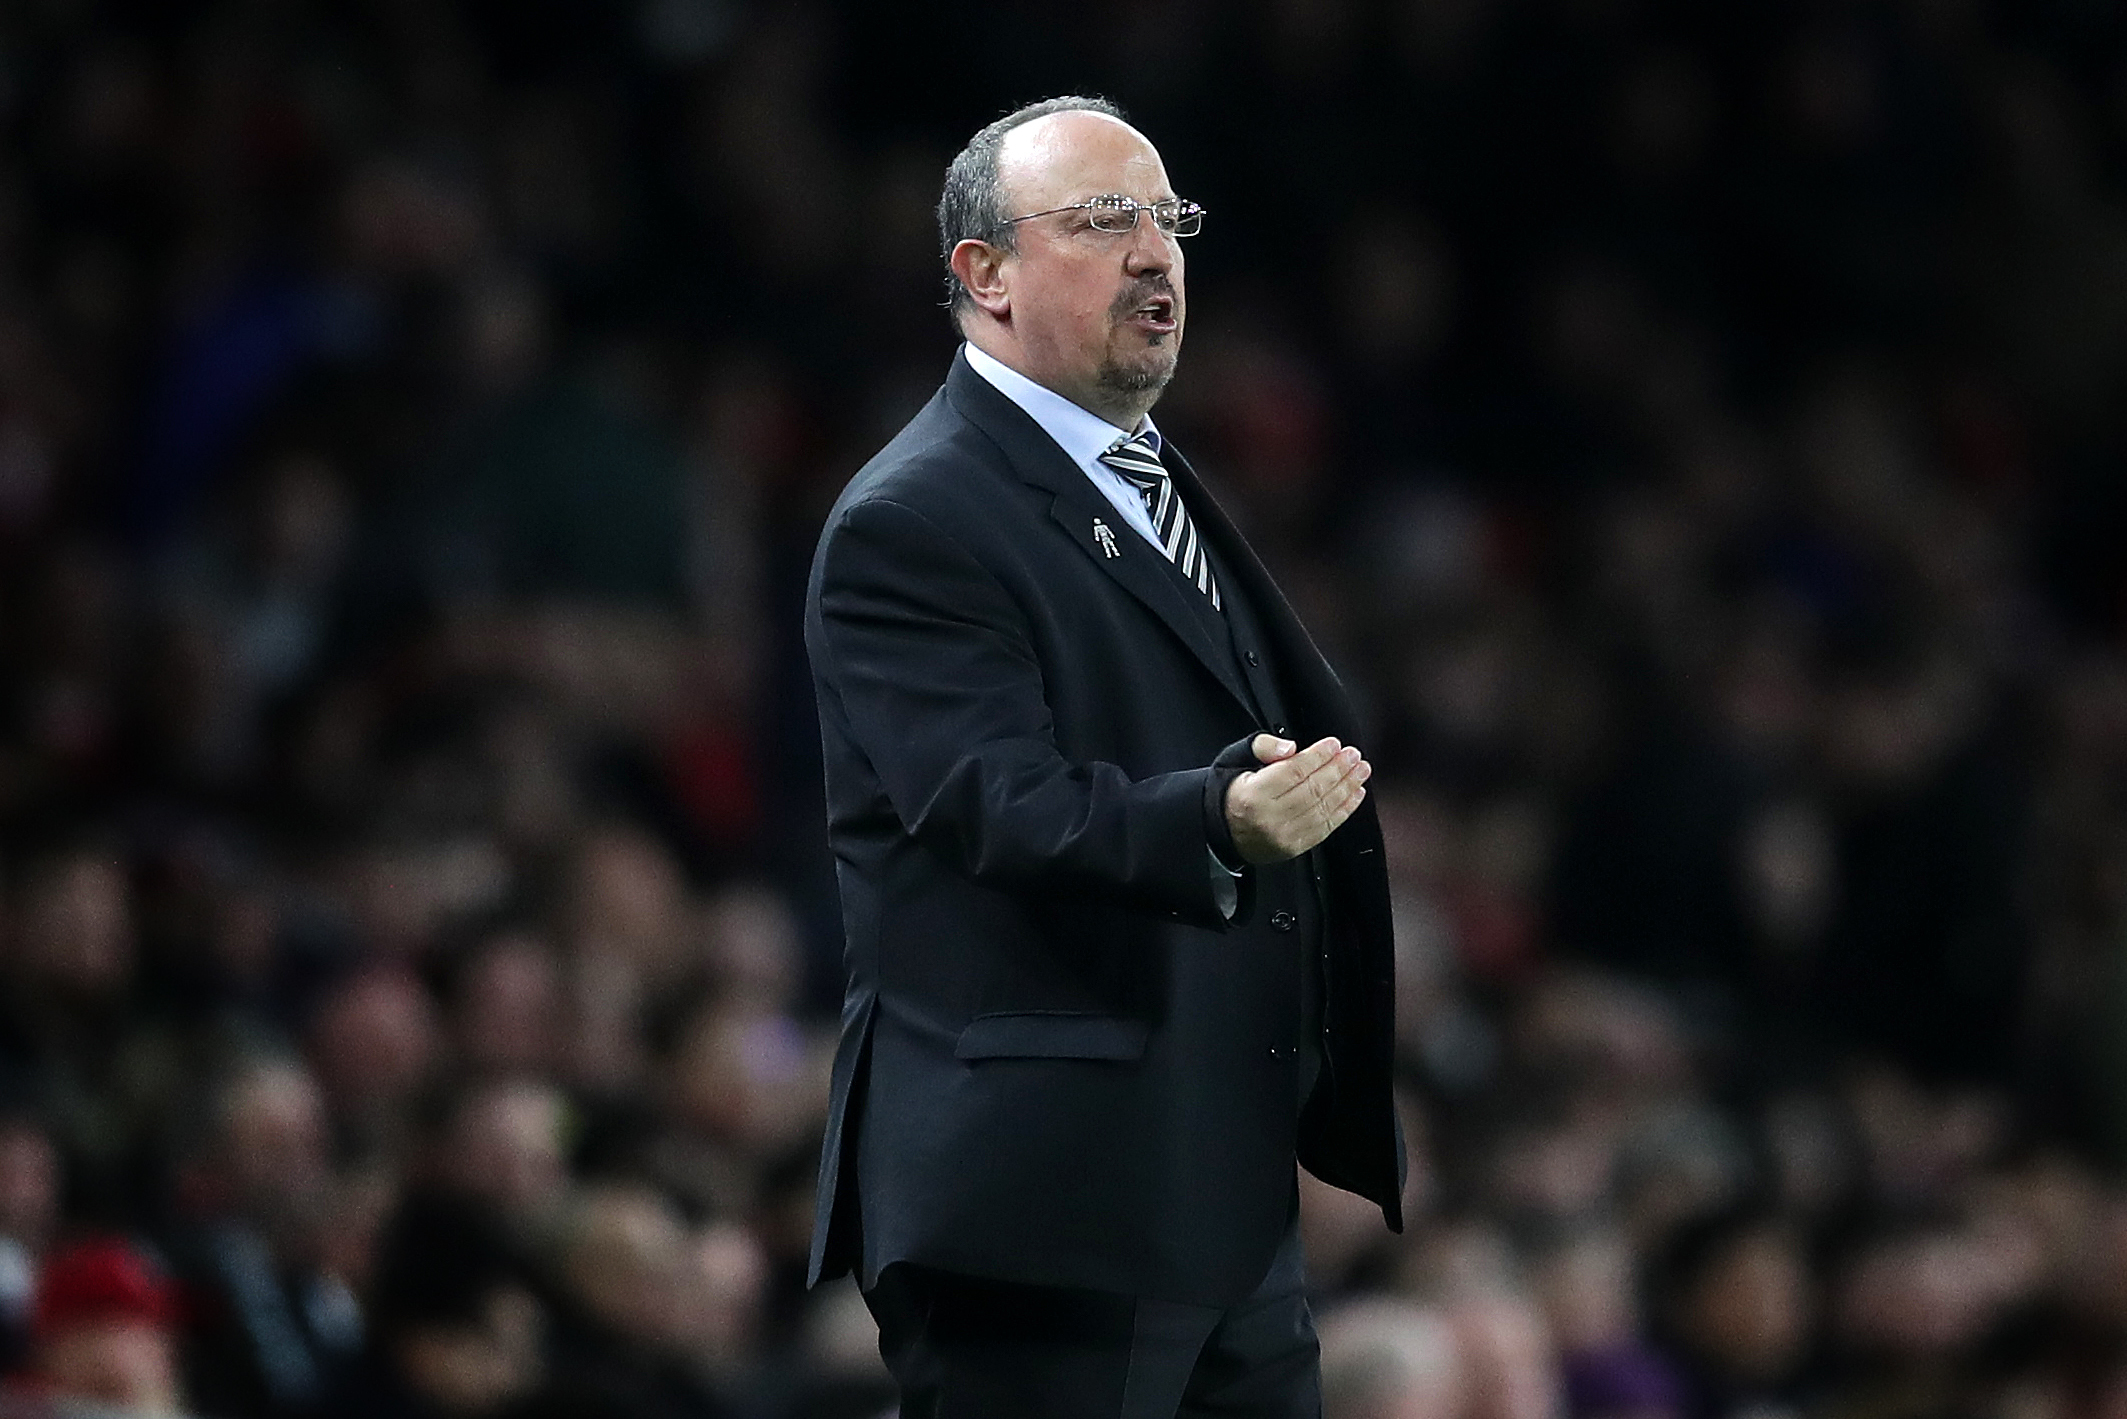 Rafael Benitez: 'If Newcastle can't be a club that can compete - then I'm prepared to stay at home and wait for a better offer'